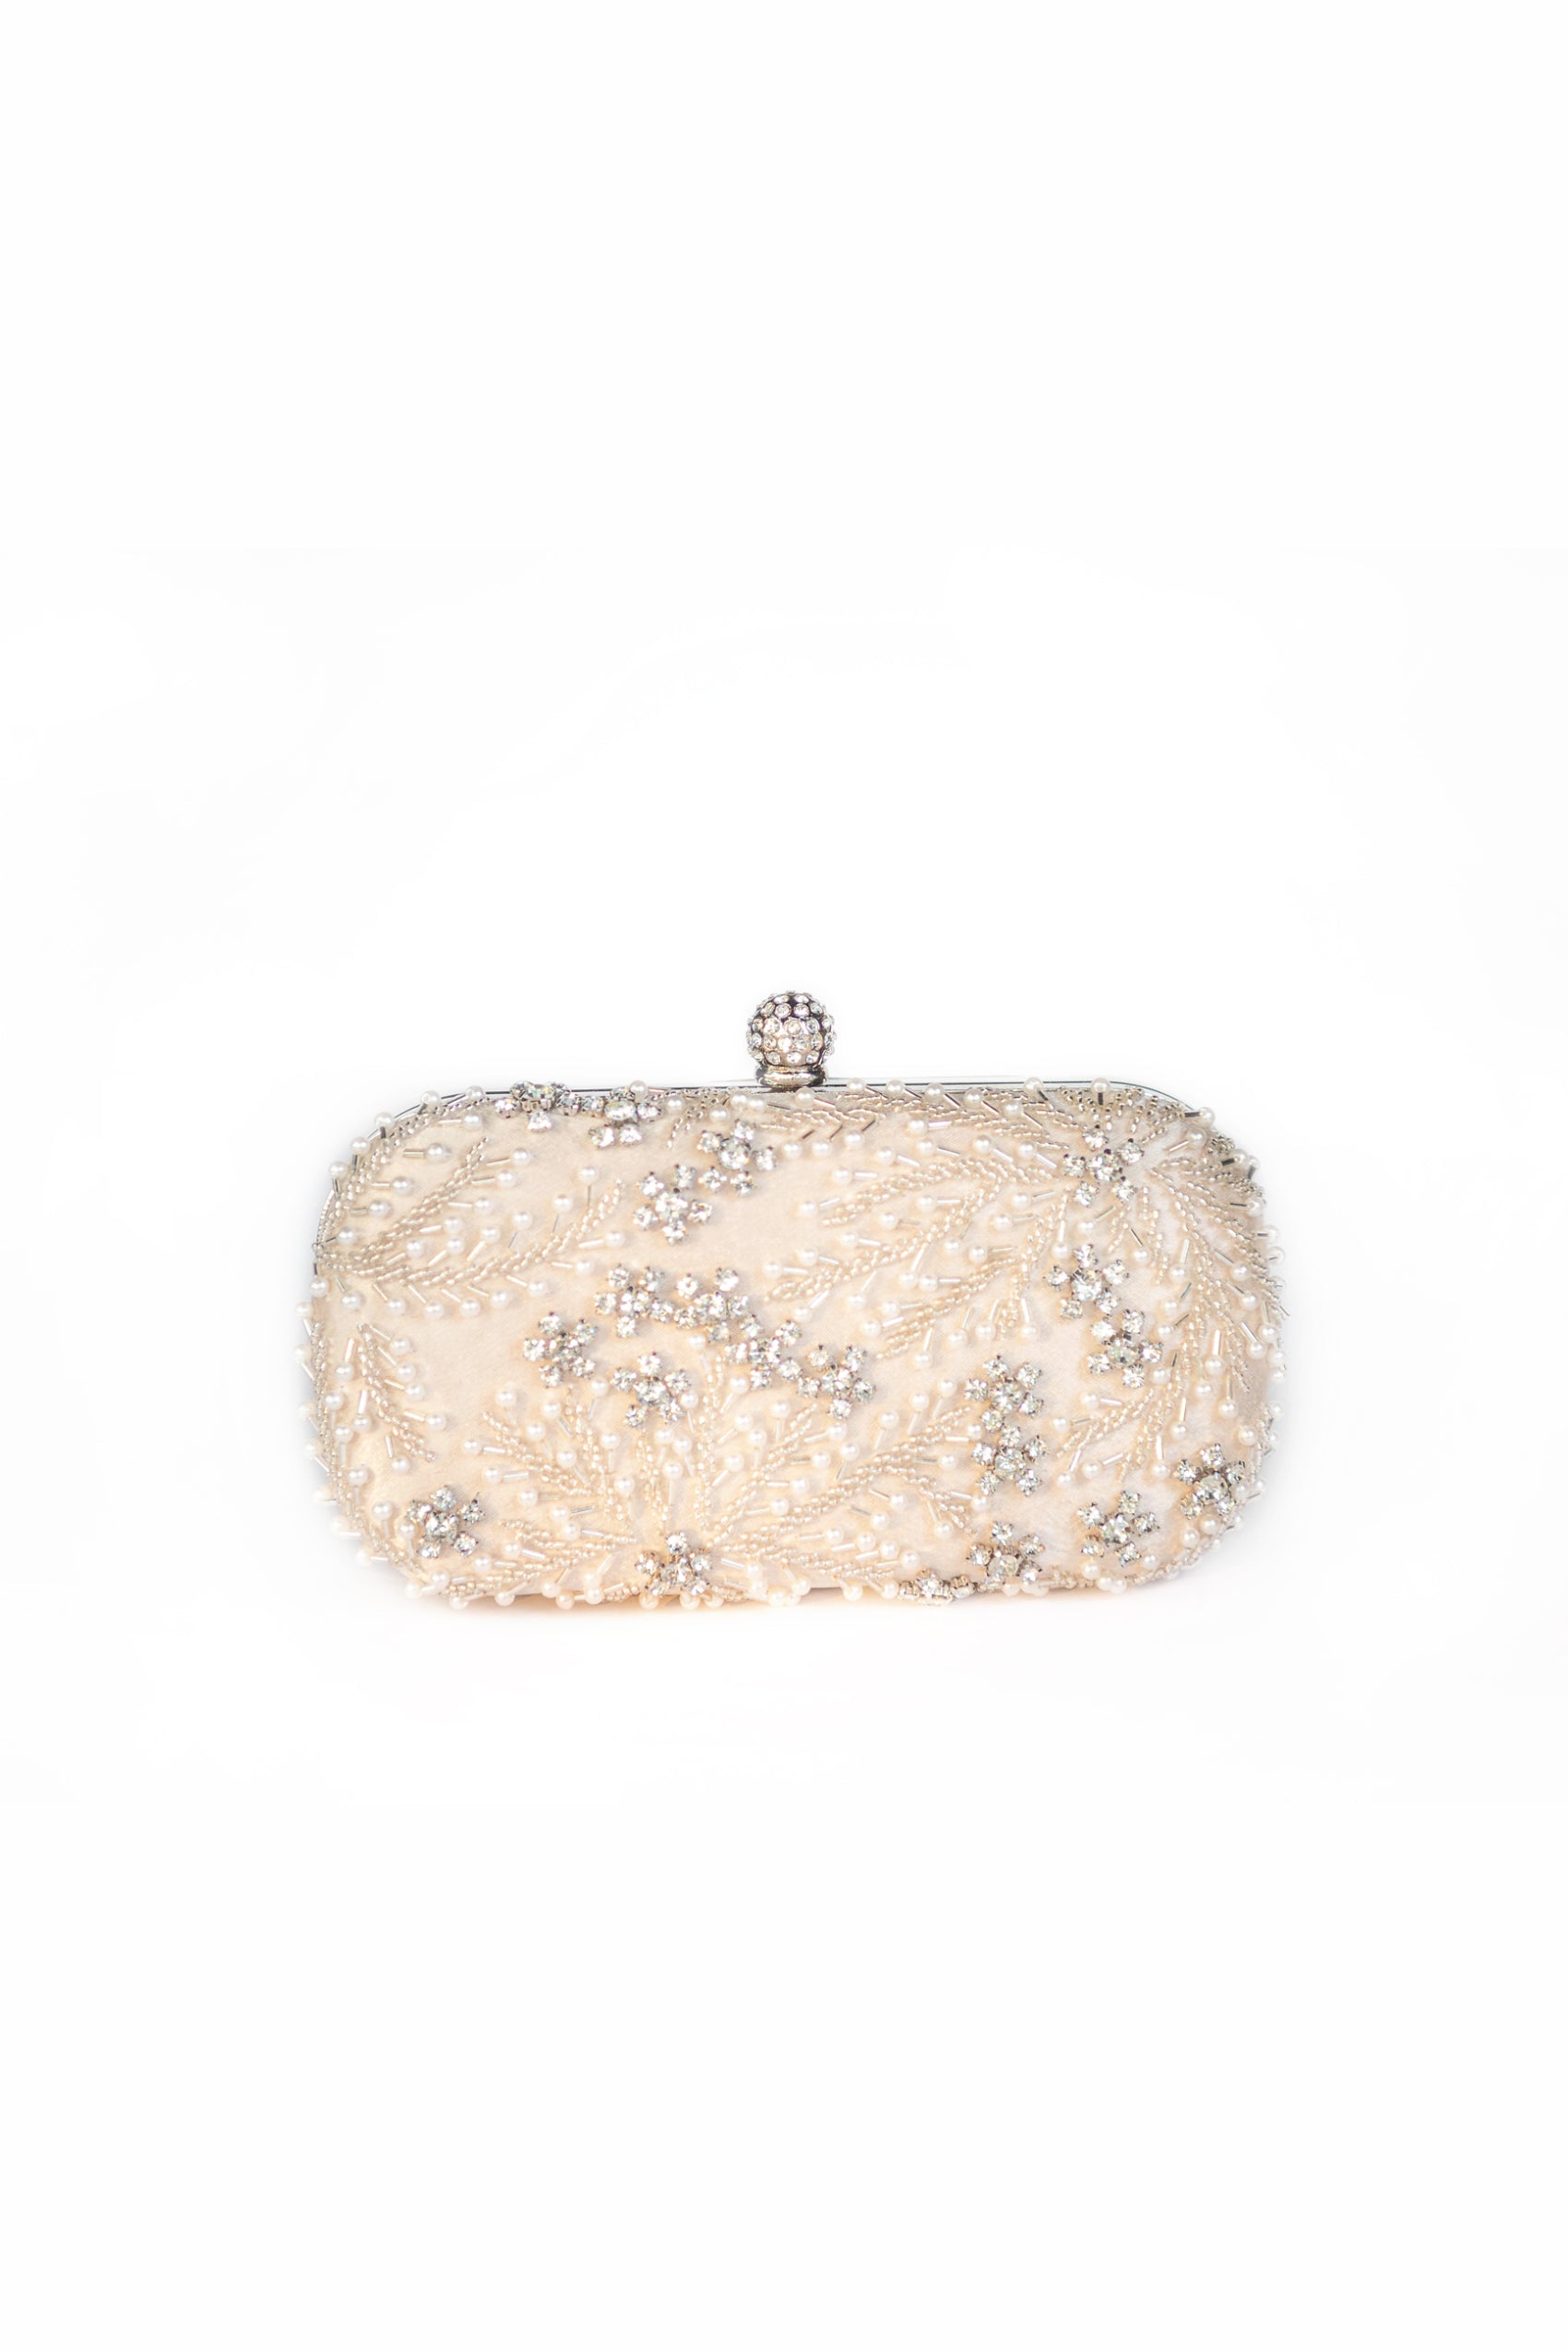 MAYBELLE BEADED CLUTCH